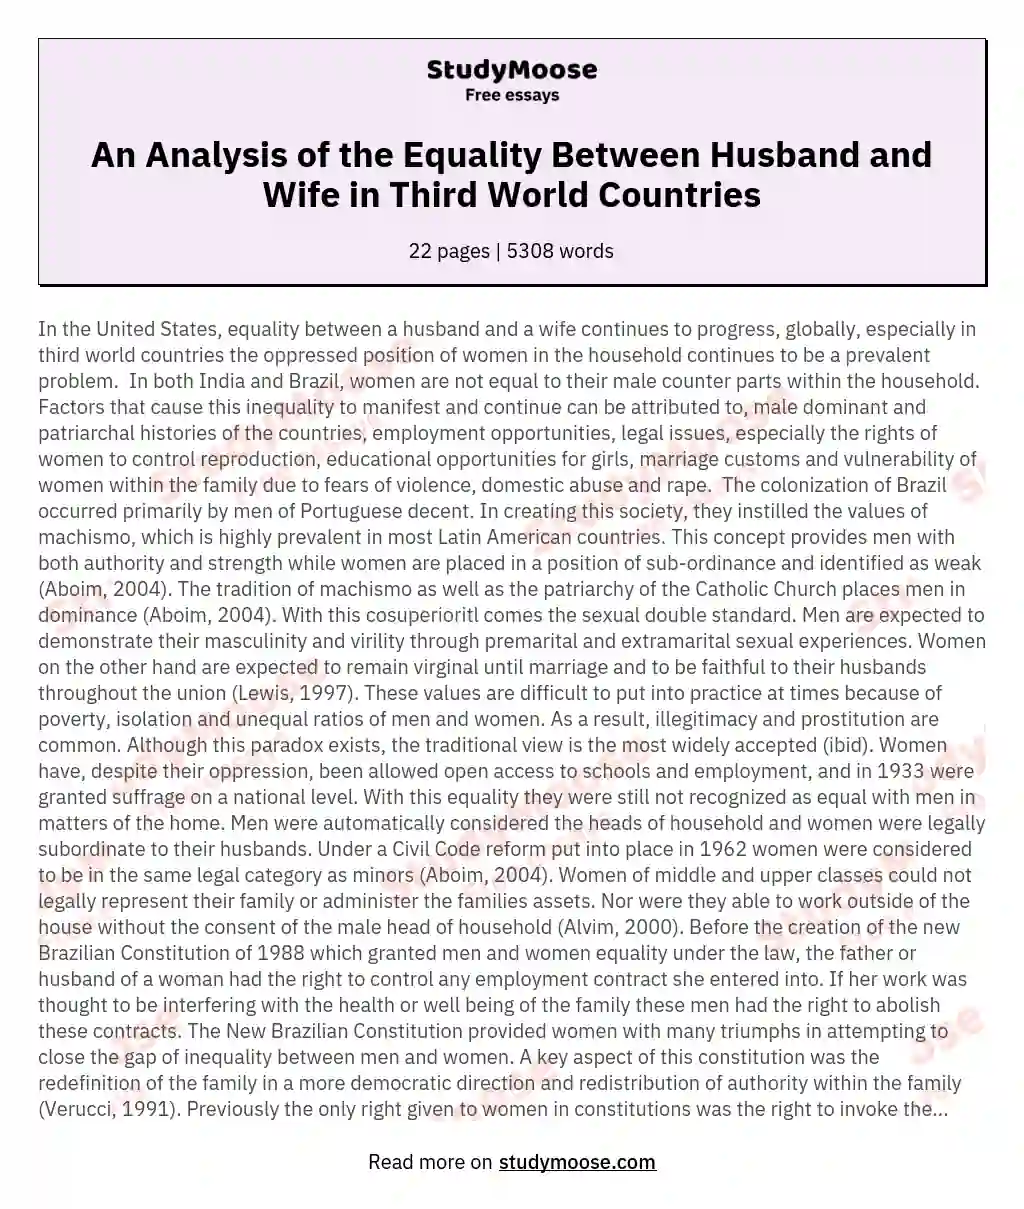 An Analysis of the Equality Between Husband and Wife in Third World Countries essay